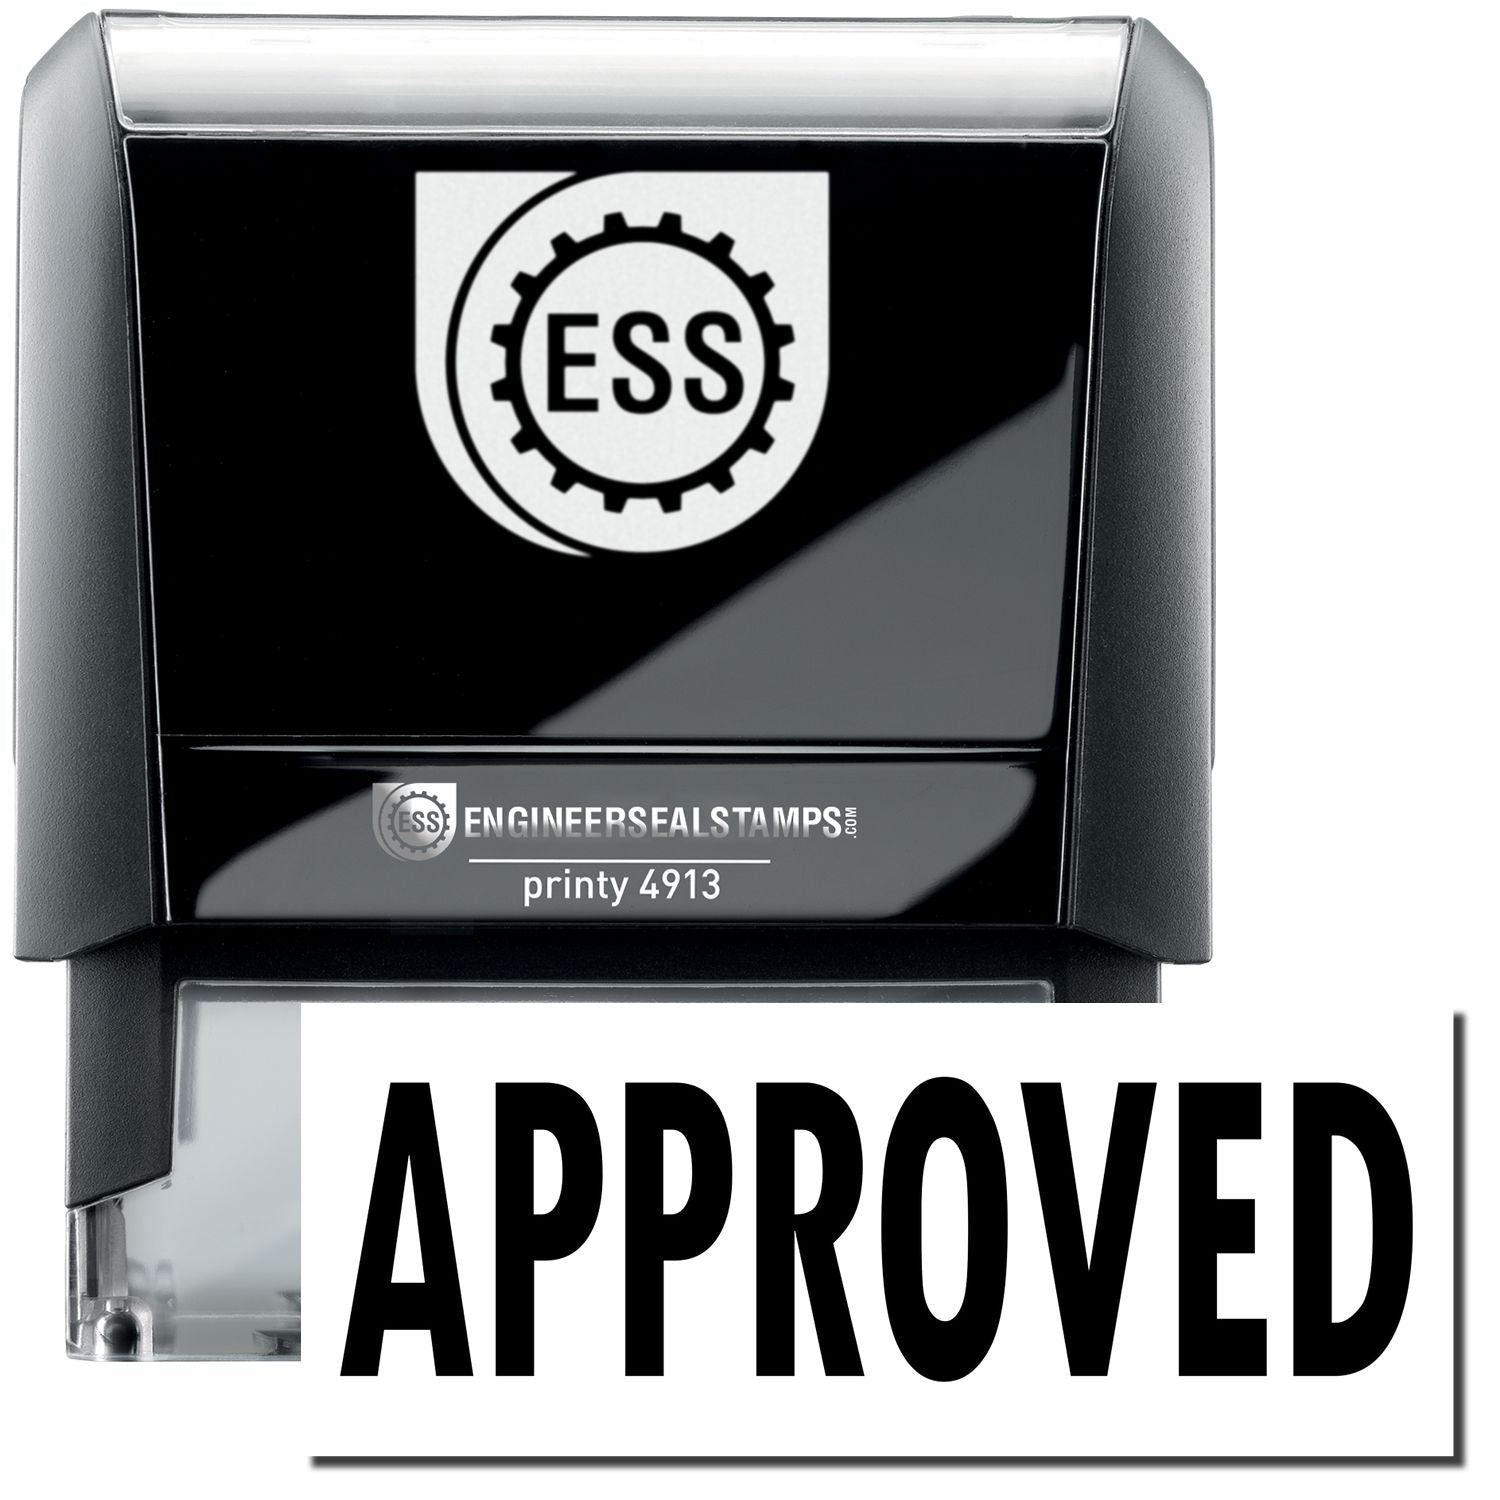 A large self-inking stamp with a stamped image showing that the text "APPROVED" in a large bold font will display by stamping